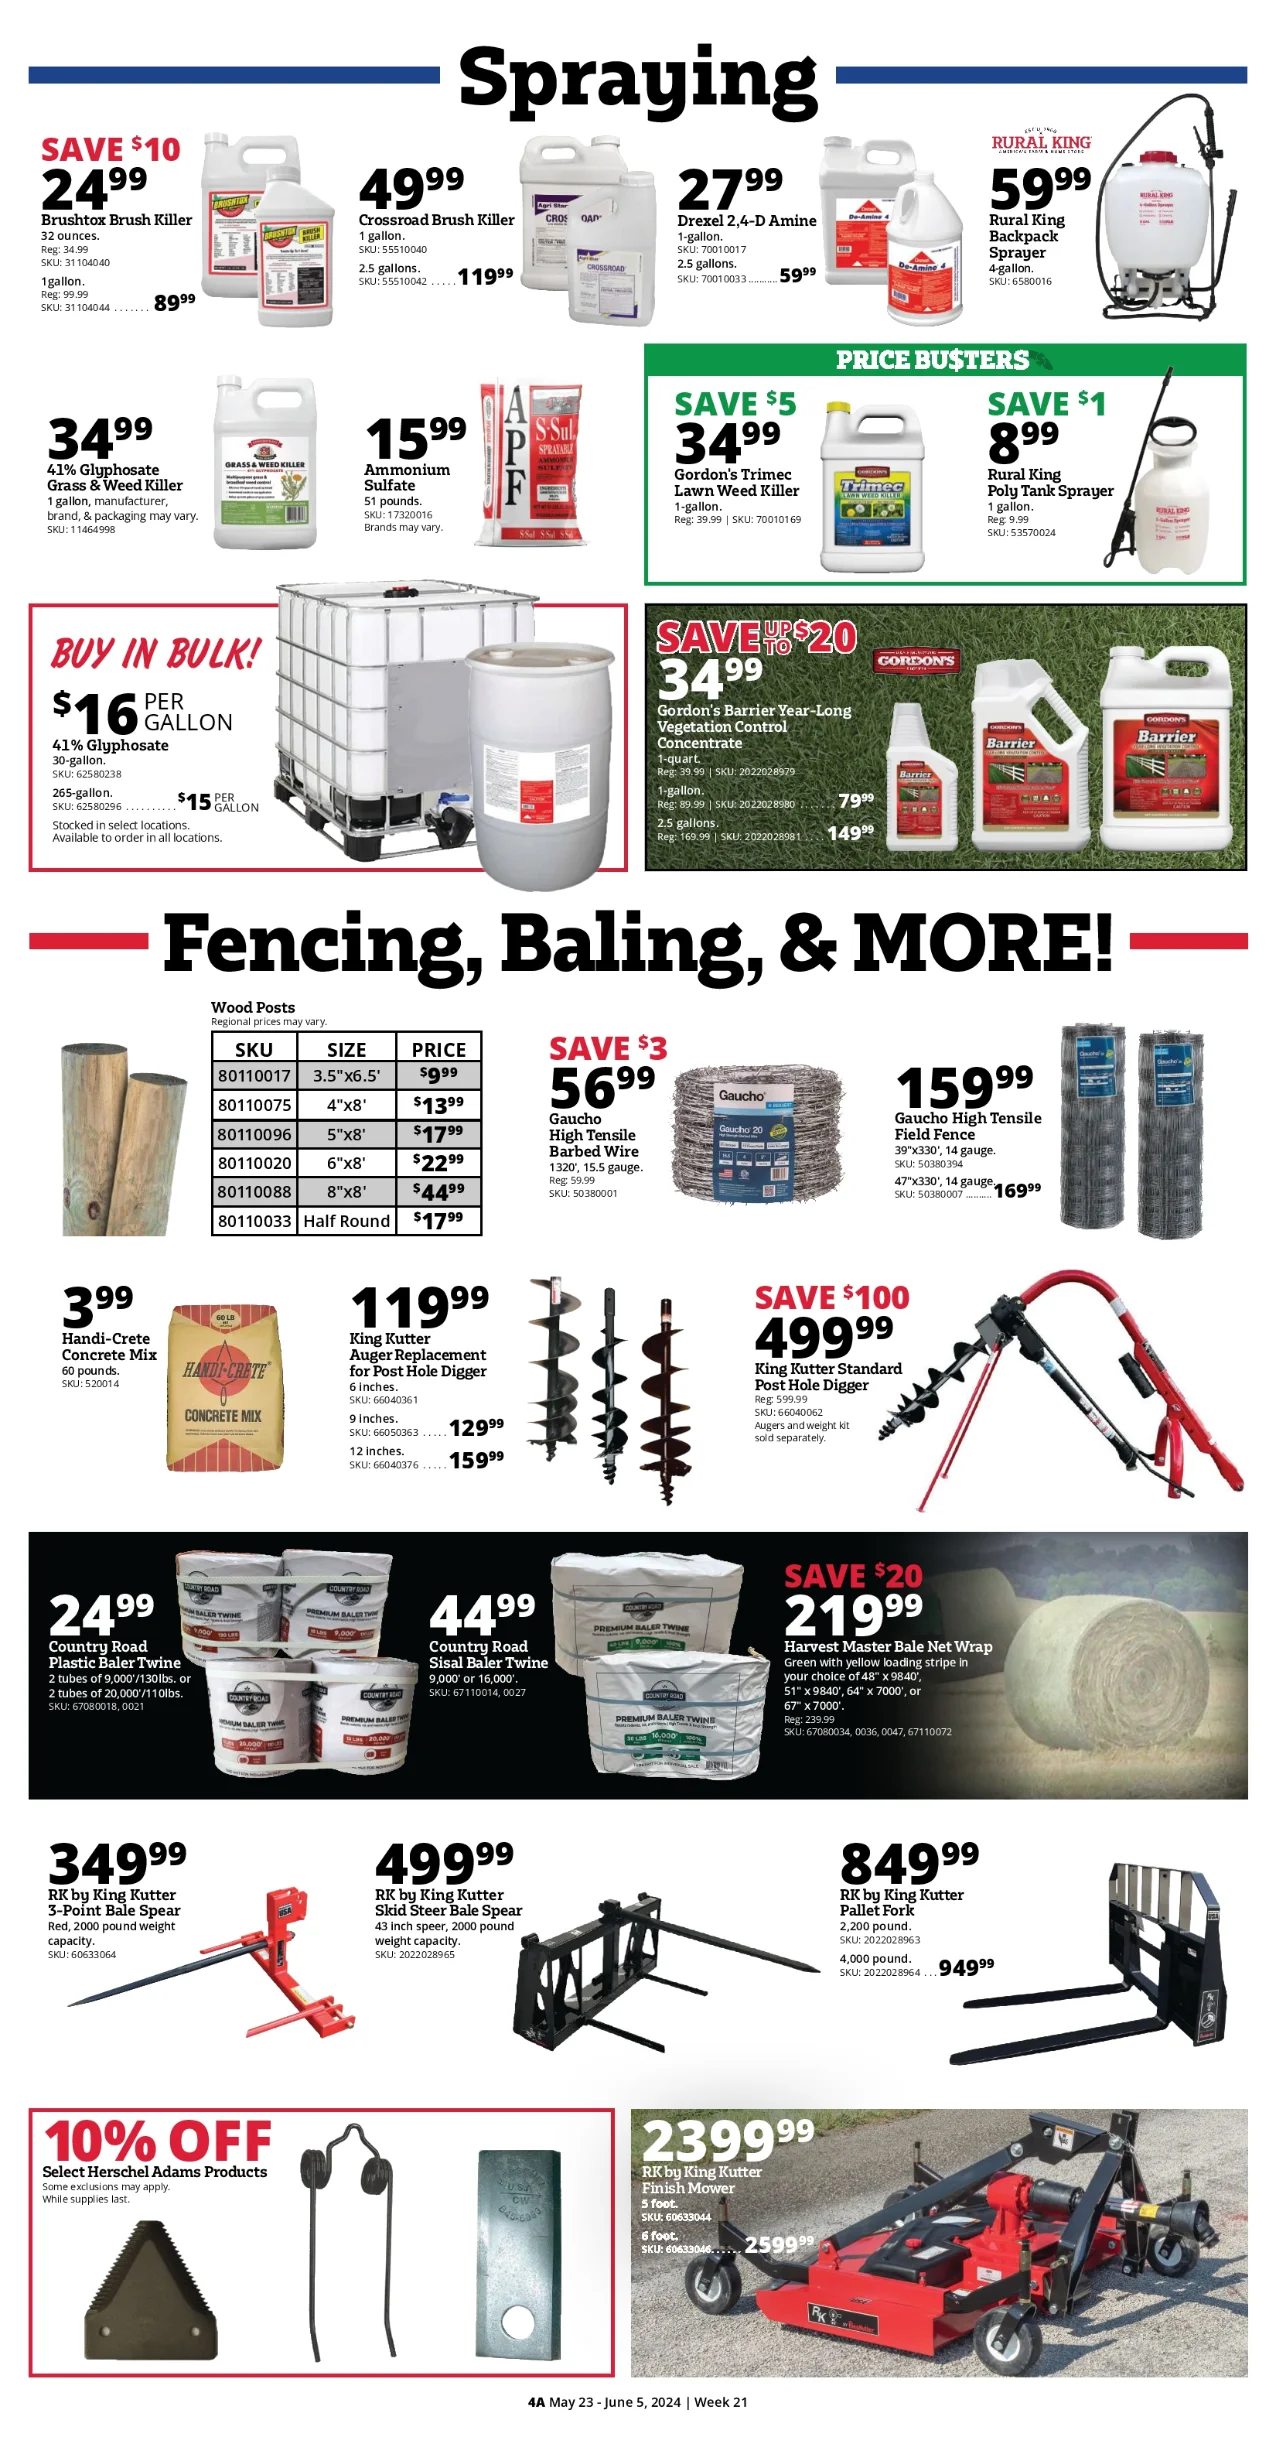 Rural King July 2024 Weekly Sales, Deals, Discounts and Digital Coupons.